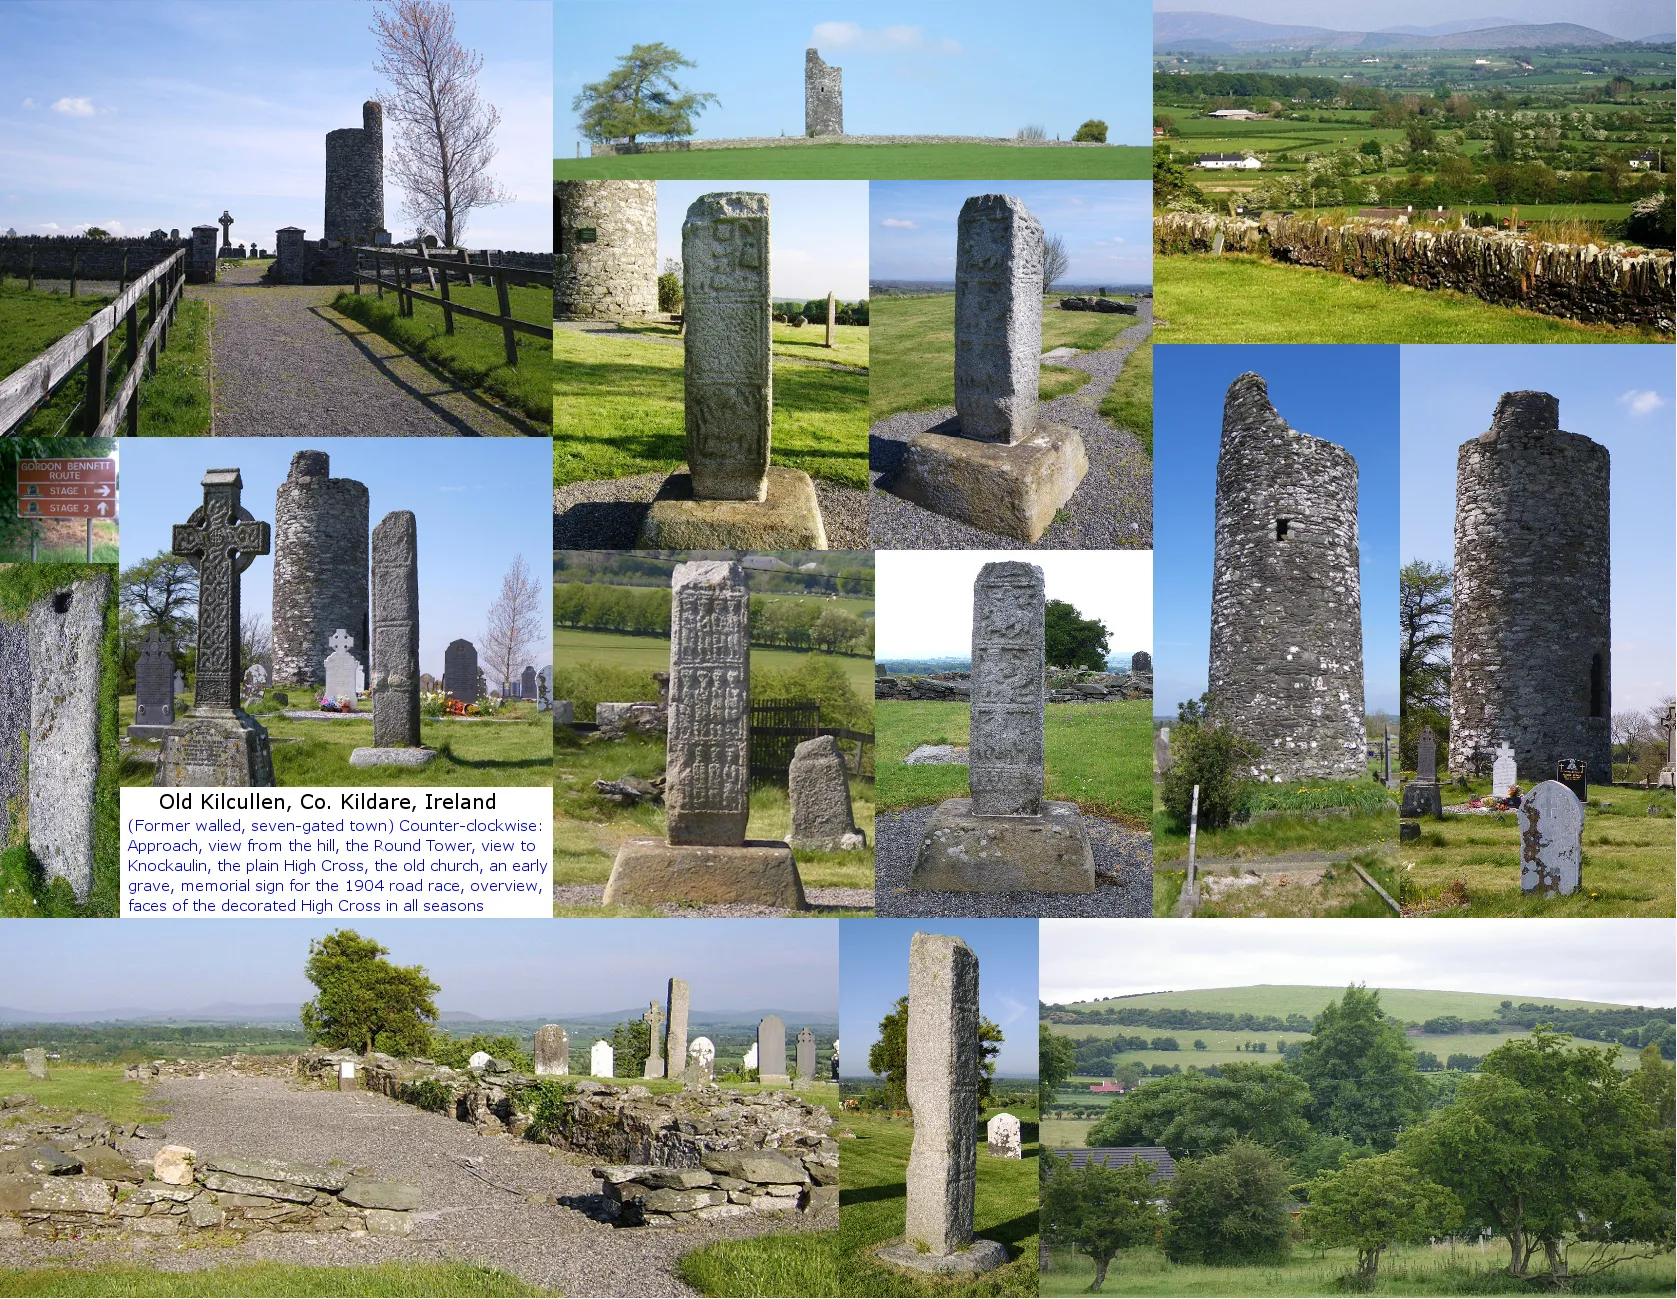 Photo showing: Old Kilcullen, Co. Kildare, Ireland: a postcard of this historical site, with images of the site from the official entrance and from the side, a view from there to the Dublin / Wicklow Mountains, two images of the round tower, a view towards Knockaulin / Dun Ailinne, the plainer of the High Crosses, the old church, a grave, a memorial sign for a famous 1904 road race, an ensemble scene, and images of the sides of the decorated High Cross in various seasons. I made these, of this former seven-gated town, and will publish it as a postcard tomorrow, inspired by a set of postcards of Kilcullen (Bridge), a few km away, seen last year.